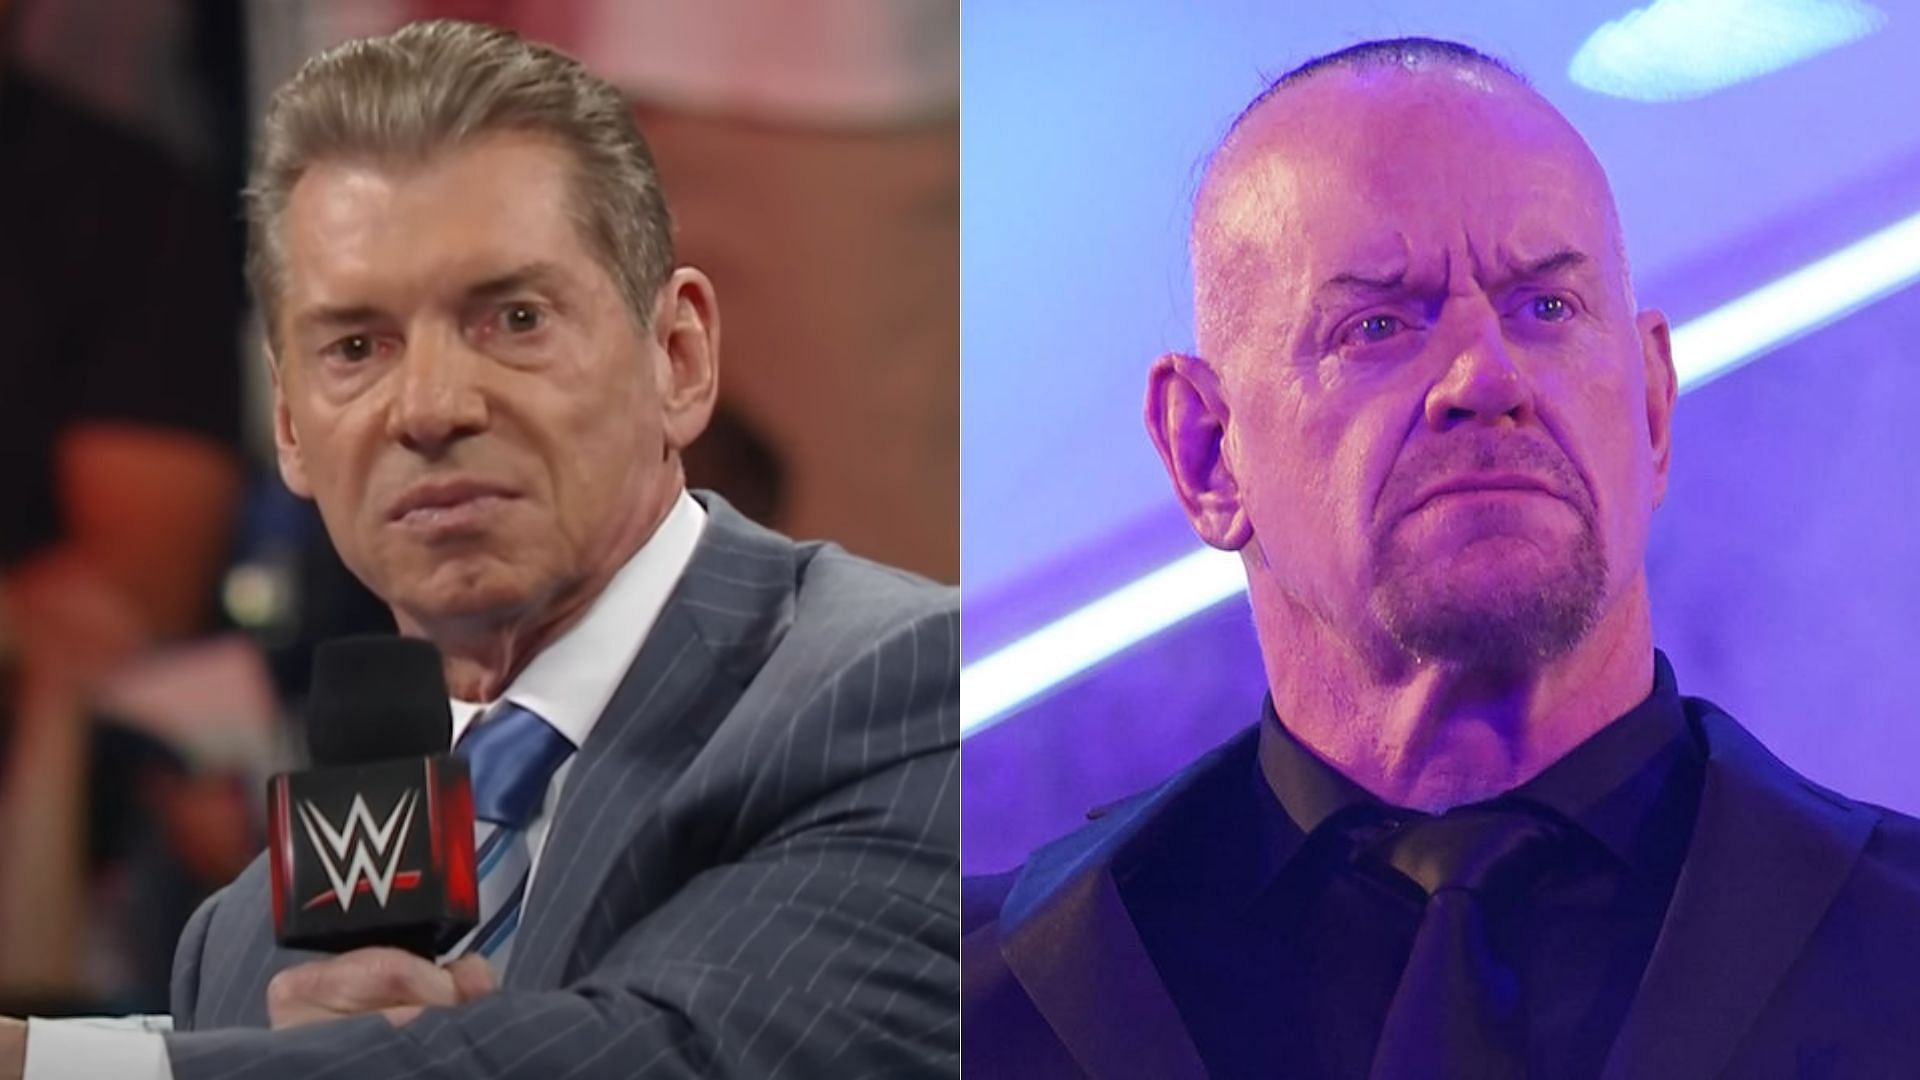 Vince McMahon (left) and The Undertaker (right) are friends in real life.